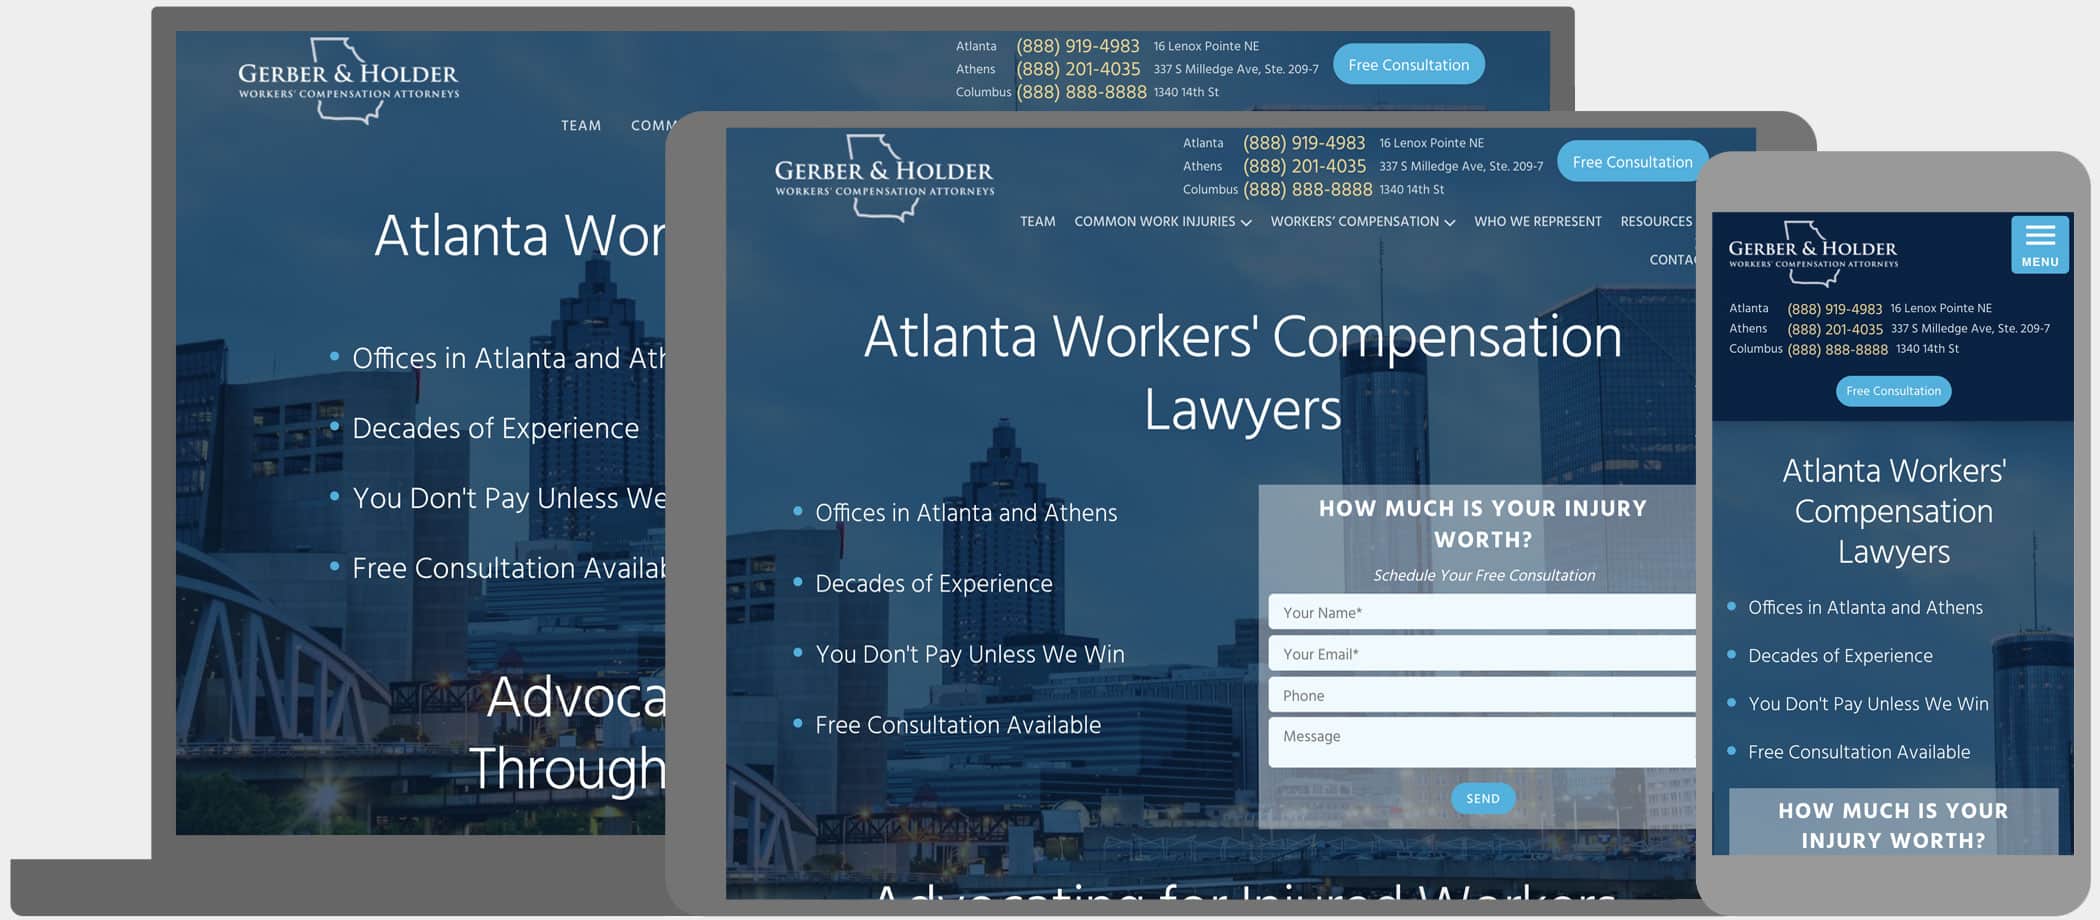 Gerber & Holder Workers' Compensation Attorneys: We improved lead generation and increased attorney's revenue through better SEO and user experience.